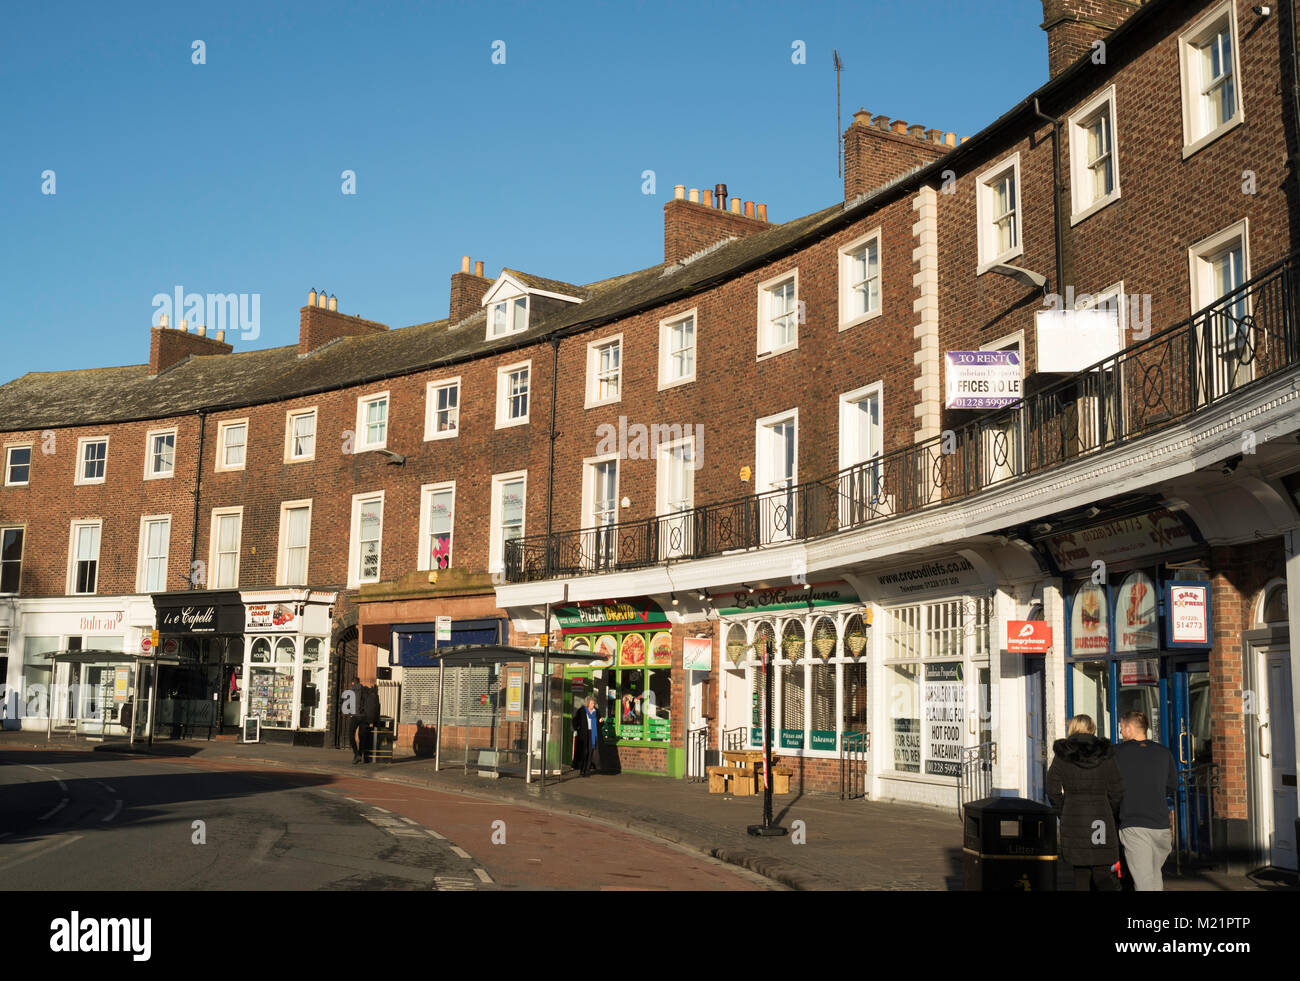 Early 19th century listed buildings in The Crescent, Carlisle, Cumbria, England, UK Stock Photo